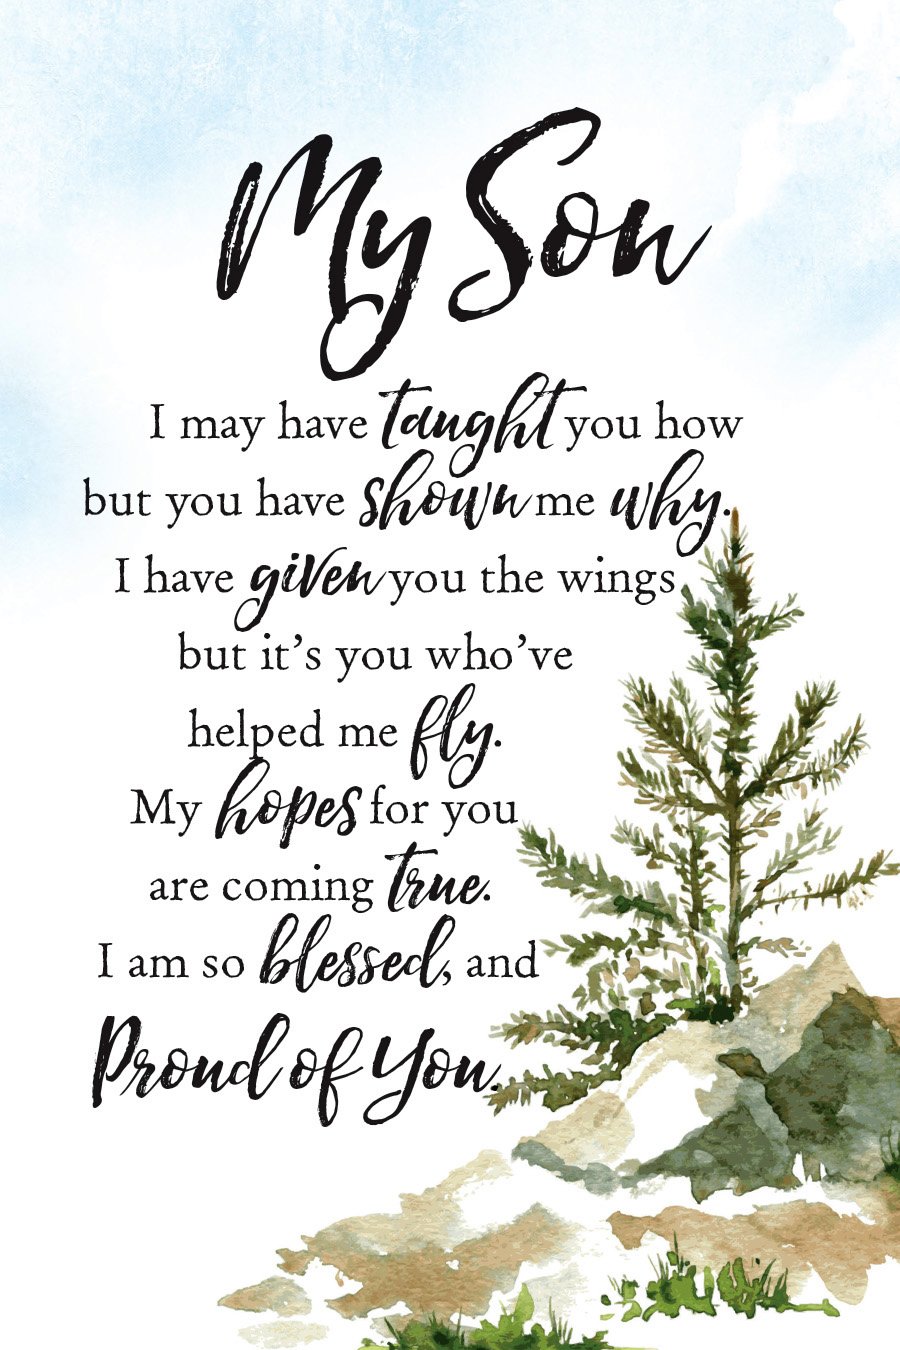 Mua My Son Wood Plaque with Inspiring Quotes 6 inches x 9 inches - Elegant  Vertical Frame Wall & Tabletop Decoration | Easel & Hanging Hook |  Christian Family Religious Home Decor